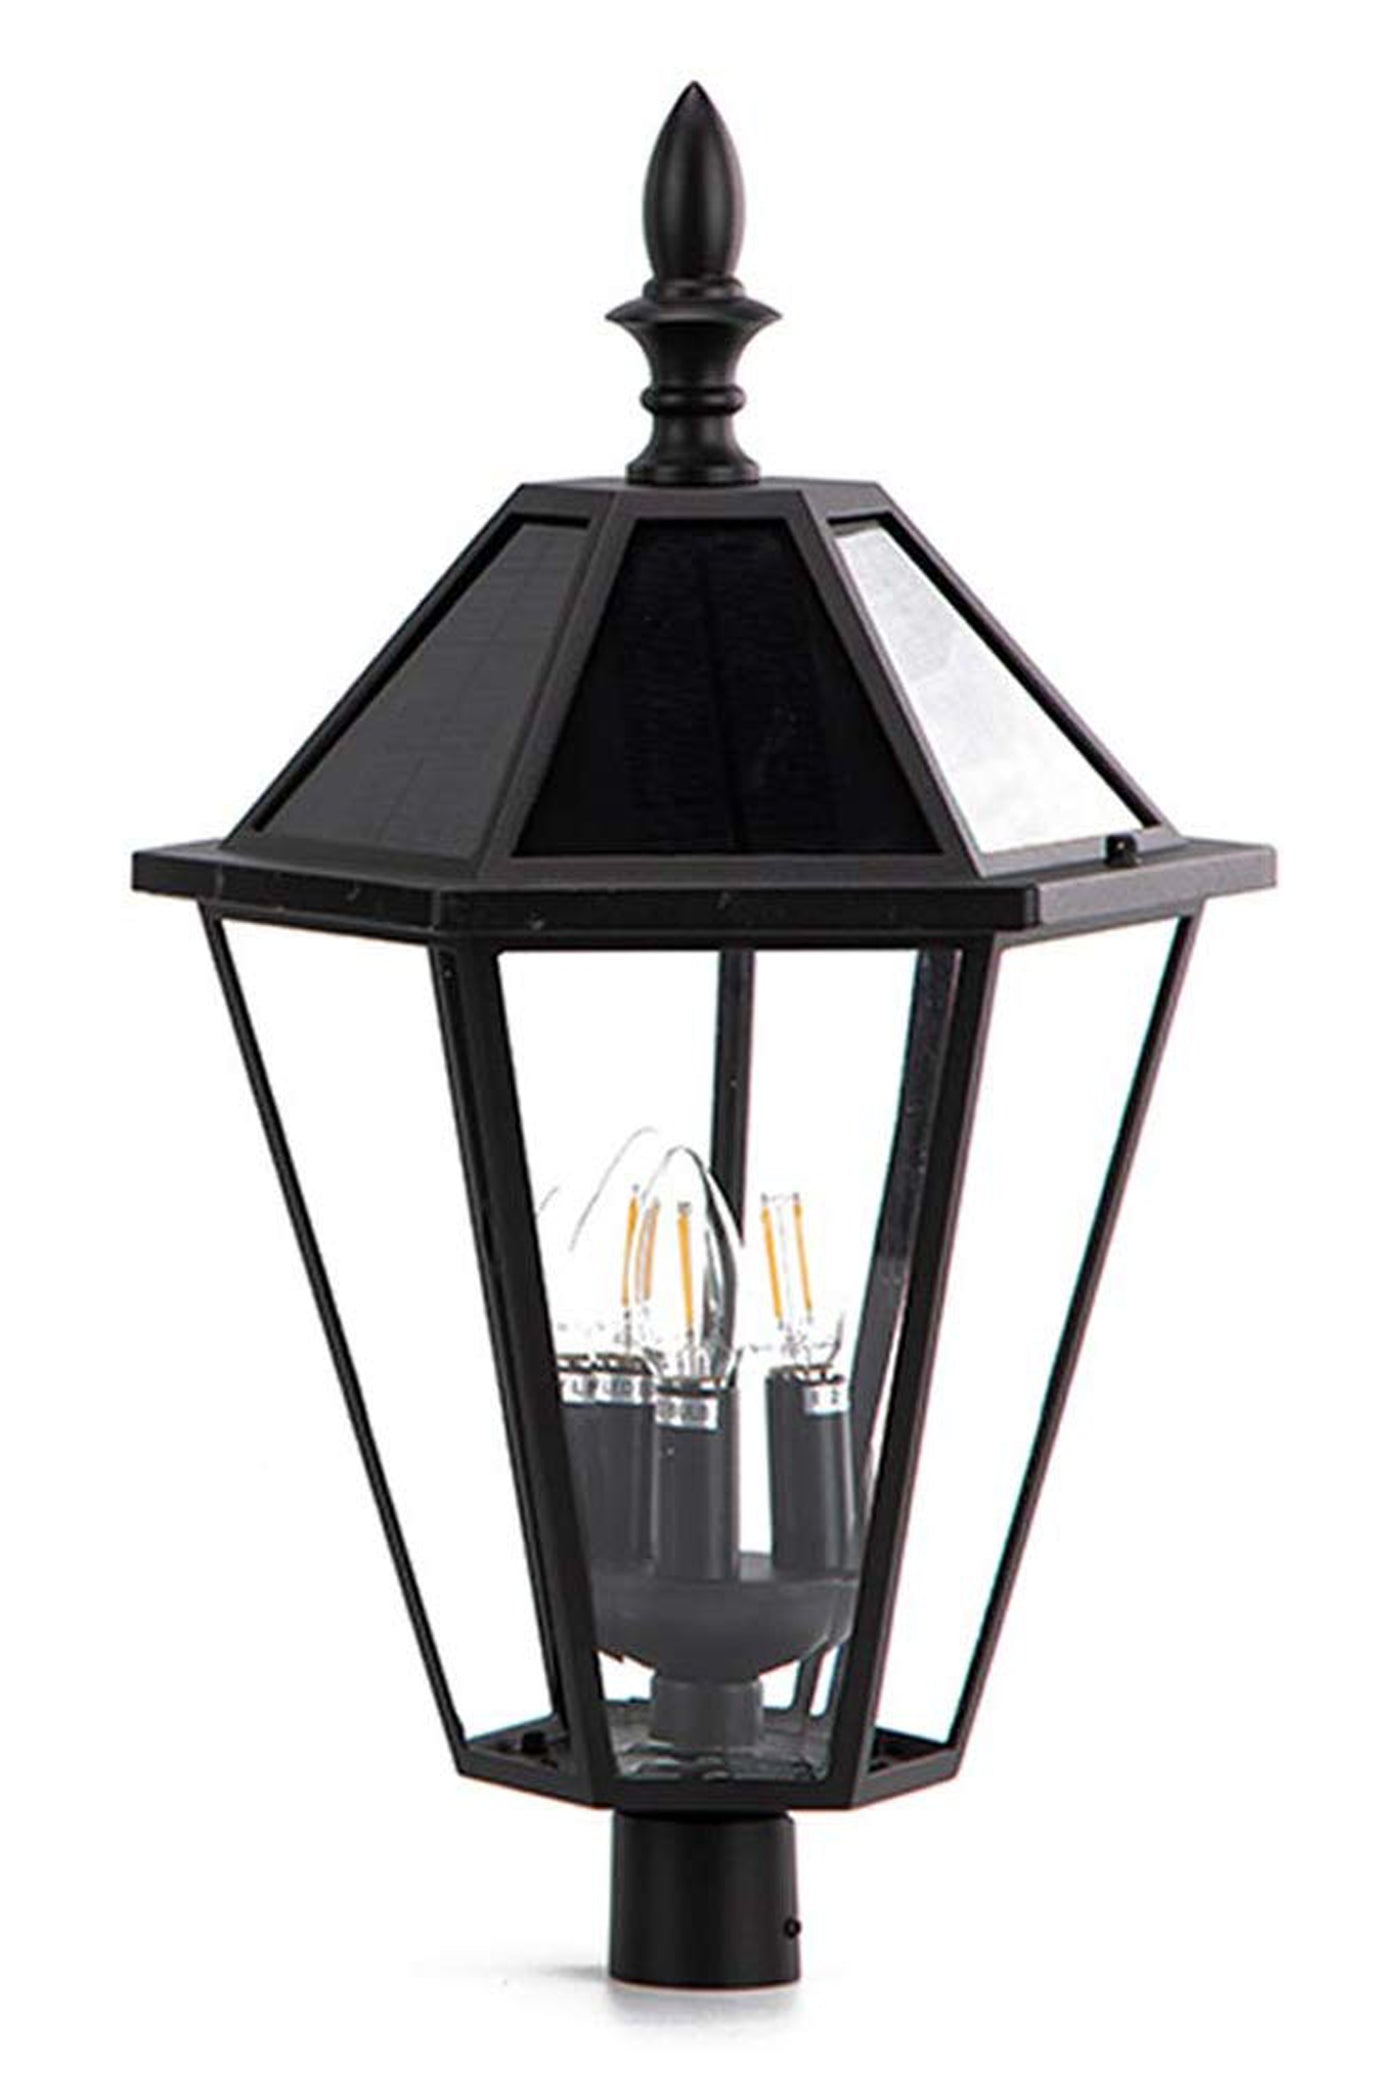 LUTEC-LONDON Die-Cast Aluminum LED Outdoor Solar Powered Post Light Head Only, 300LM, Up To 8hour Runtime, 2700K